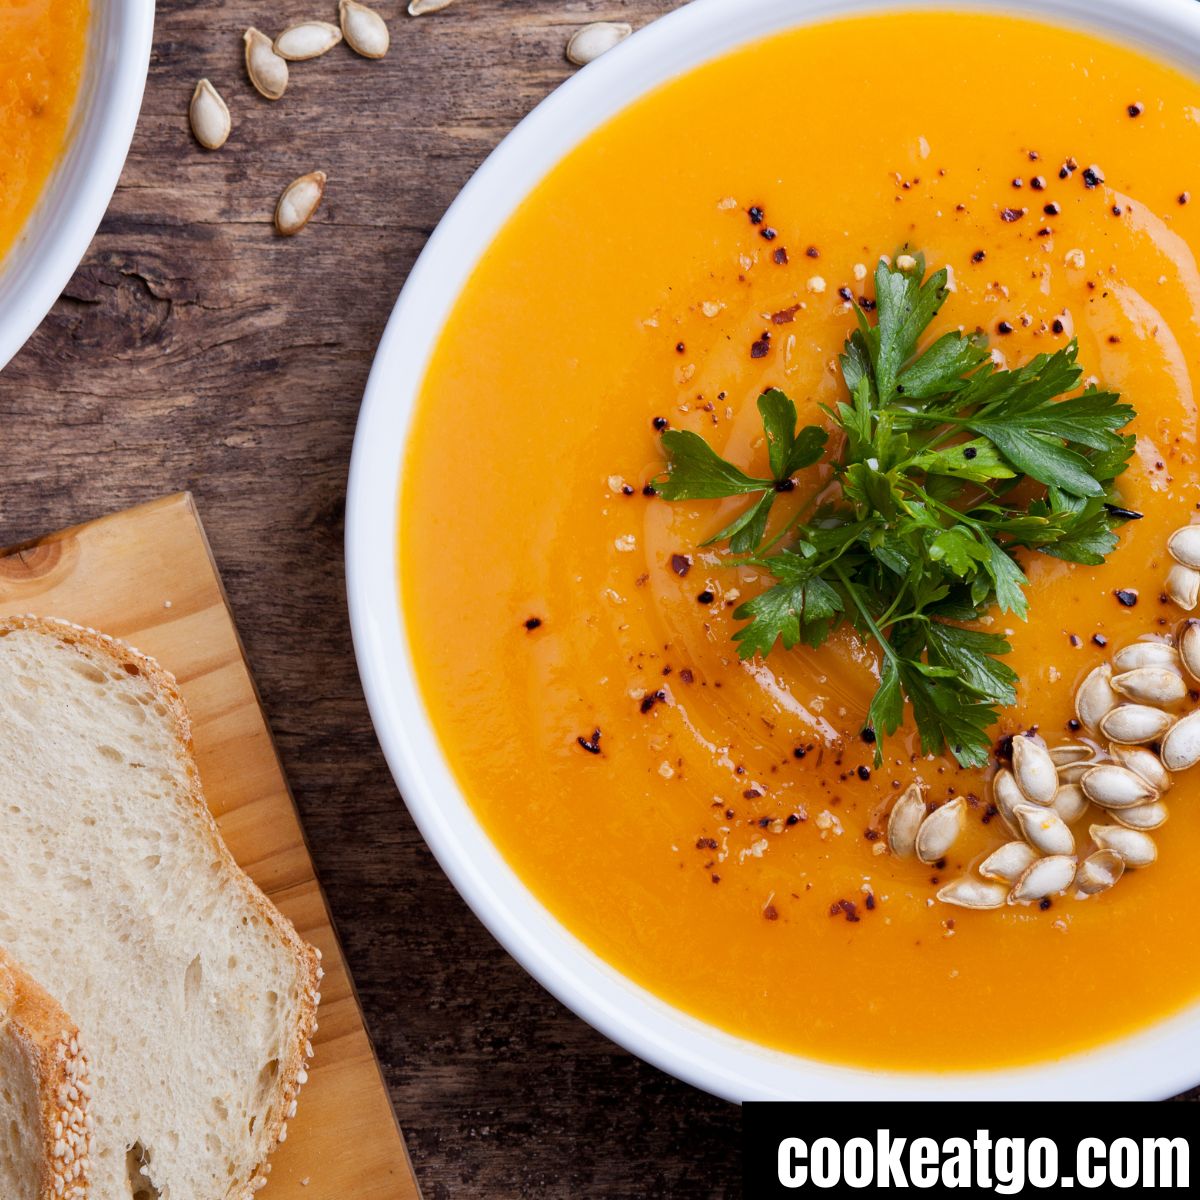 Pumpkin soup served in a white bowl as part of fall pumpkin recipes